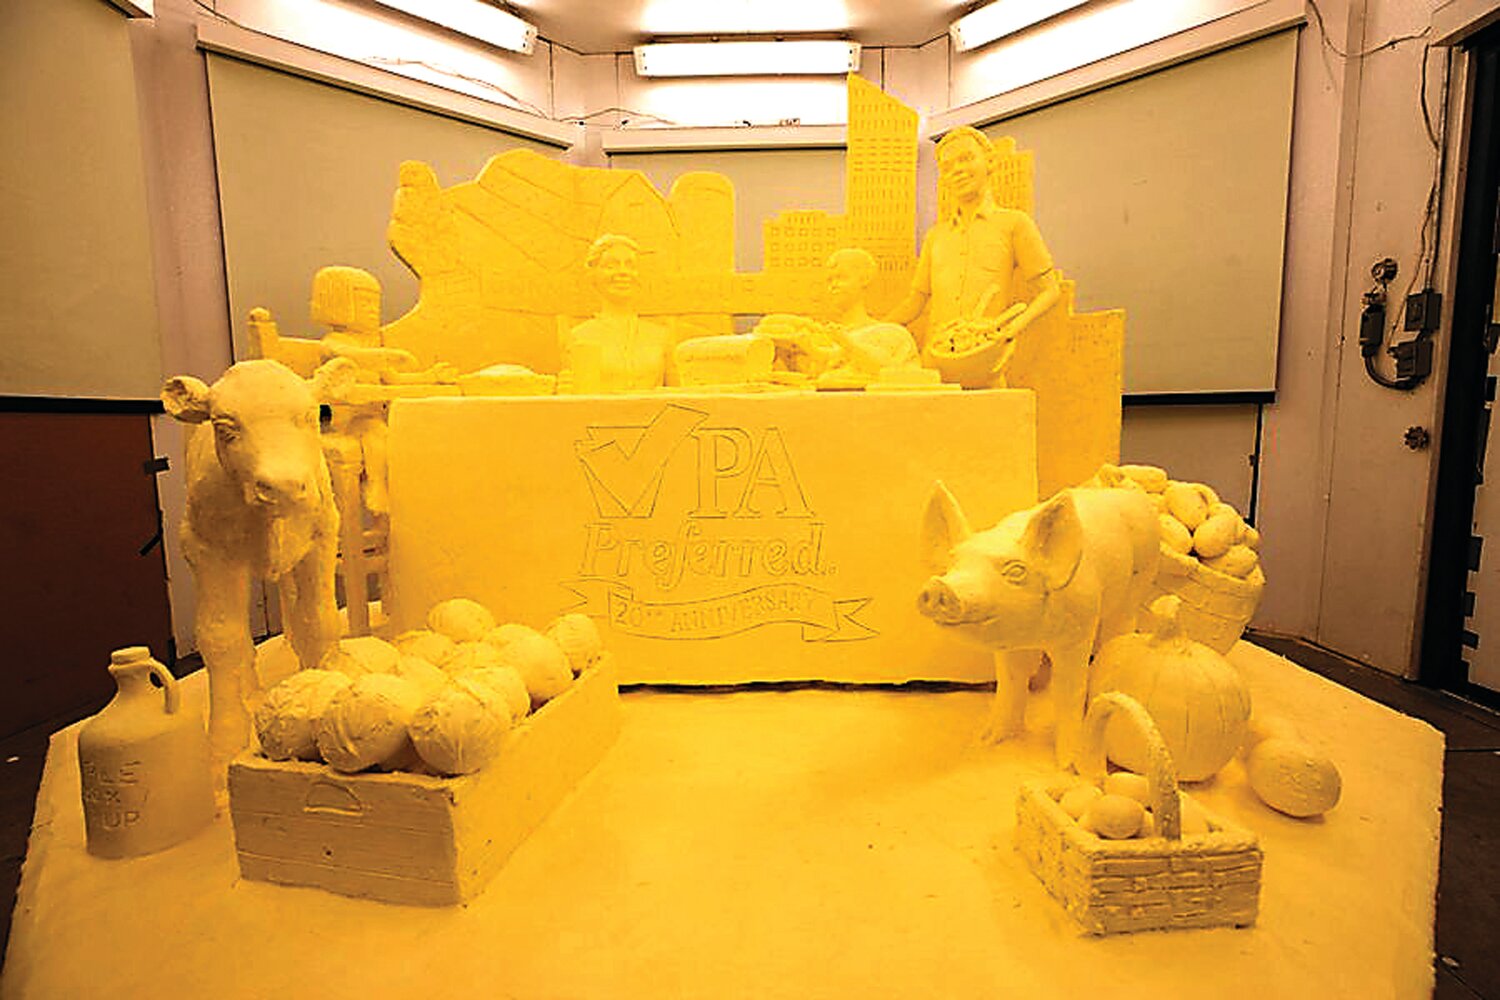 The unveiling of the annual butter sculpture is an important event at the Pennsylvania Farm Show, which continues through Saturday, Jan. 13. Although made of butter the sculpture is not edible and is repurposed as a source of fuel.